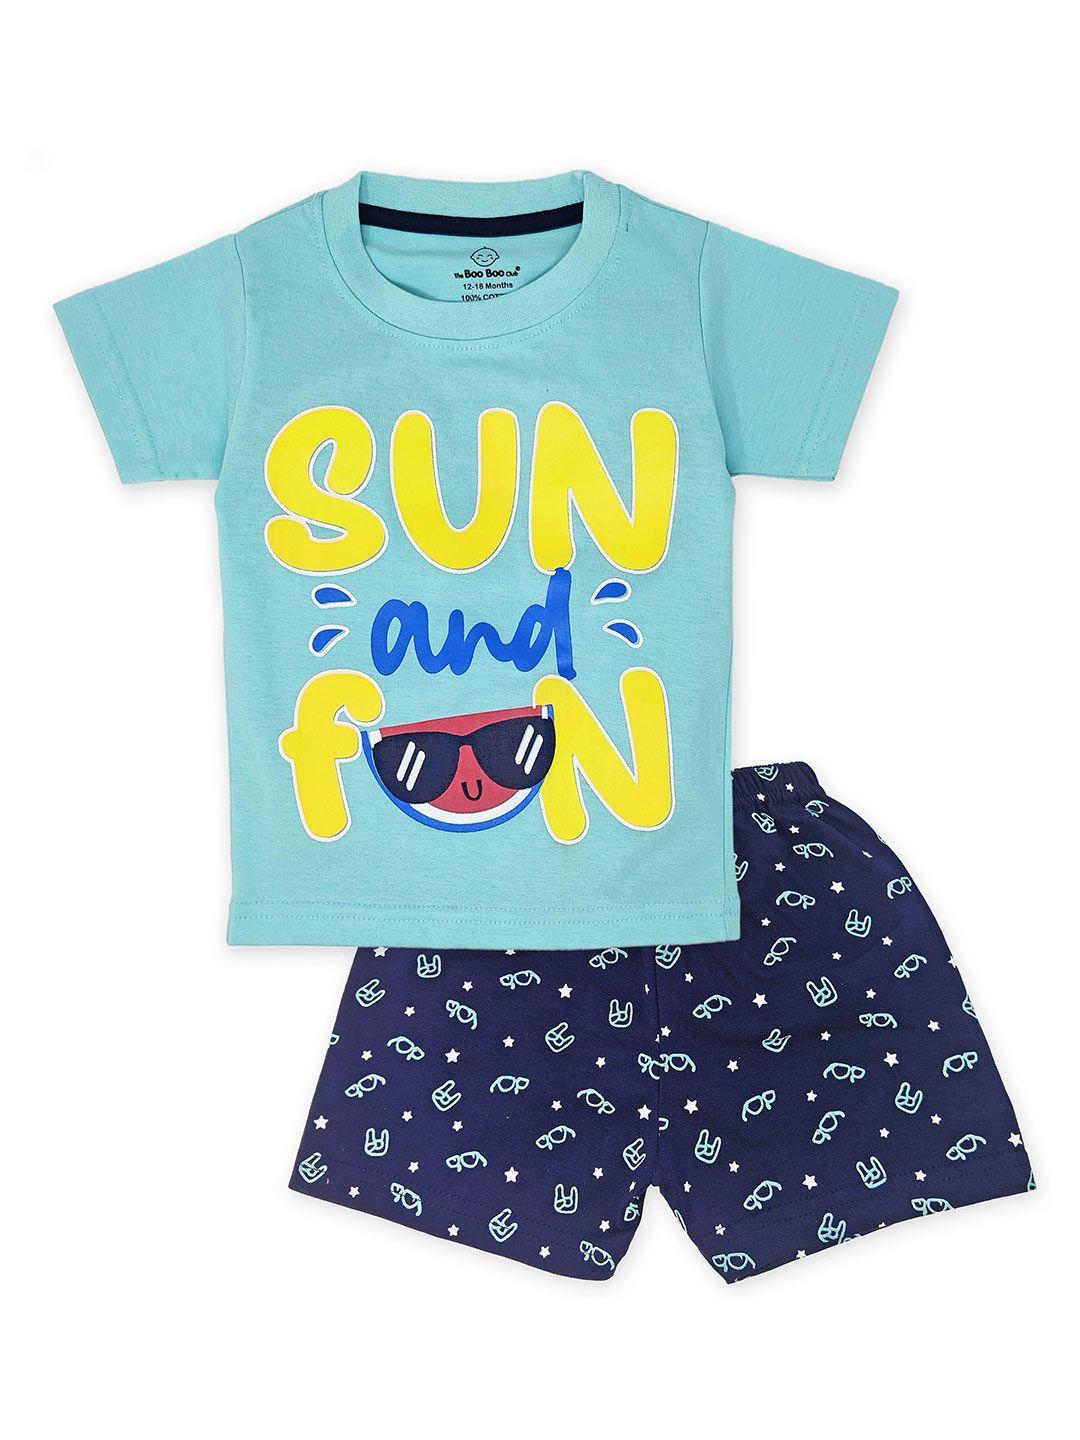 the boo boo club kids navy blue & yellow printed t-shirt with shorts